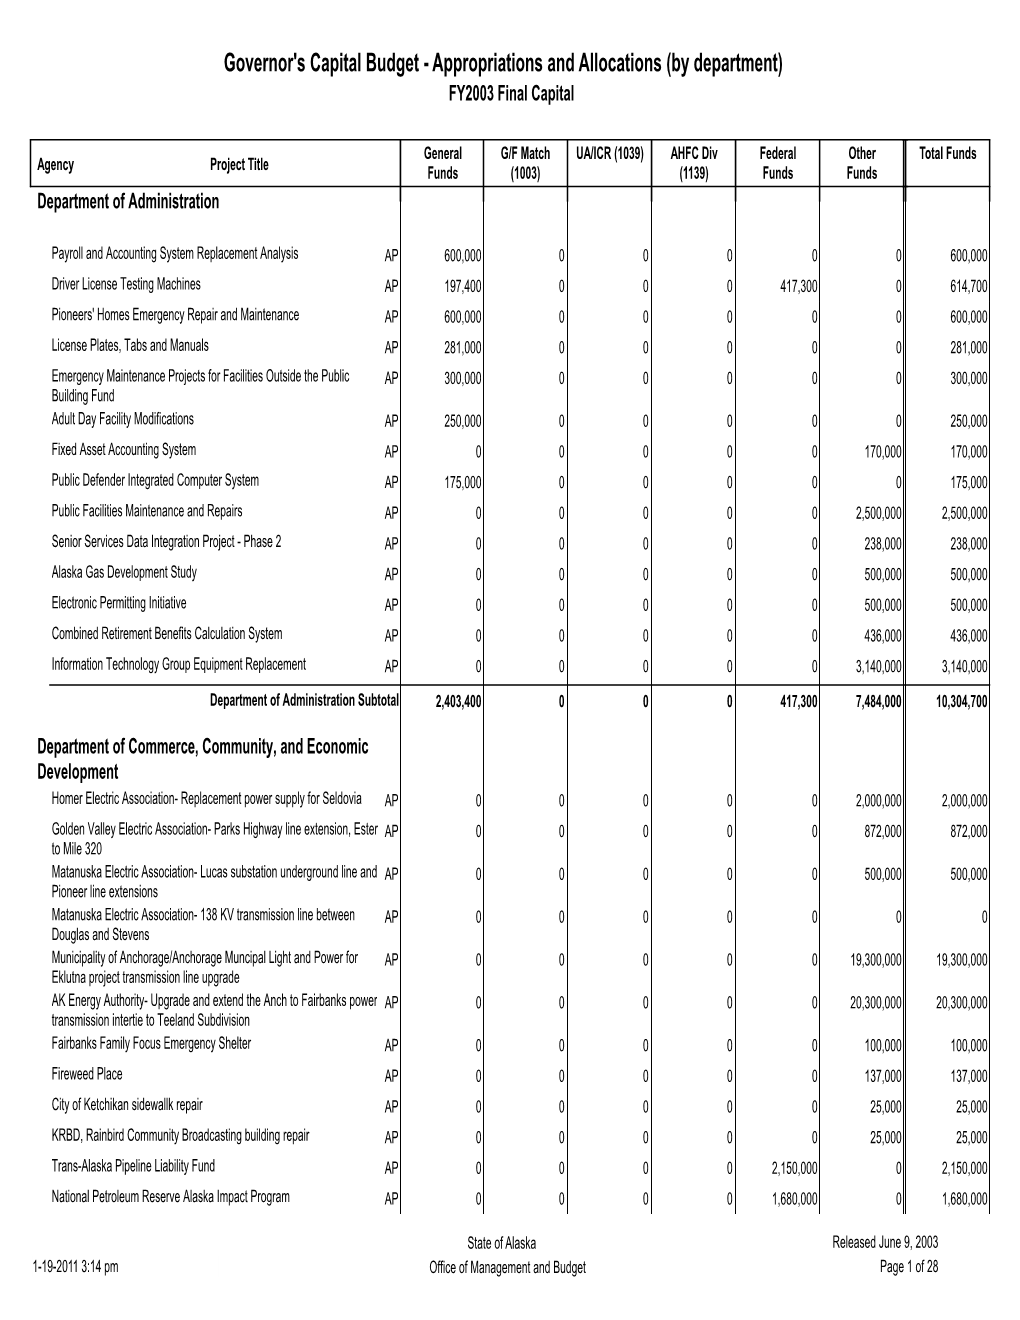 Governor's Capital Budget - Appropriations and Allocations (By Department) FY2003 Final Capital